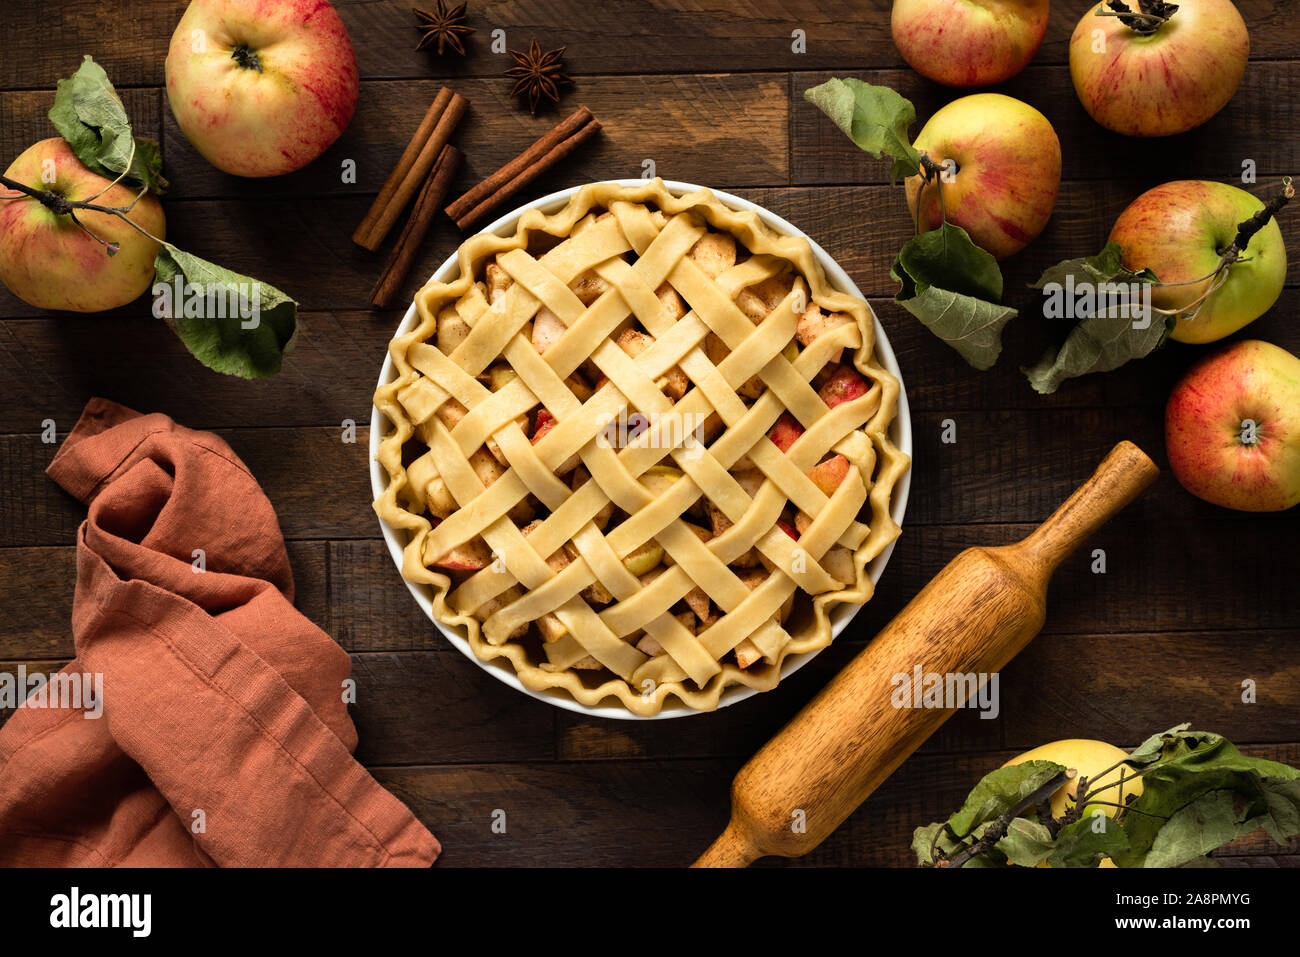 Apple pie with lattice top on wooden background, table top view. Rustic american apple pie Stock Photo